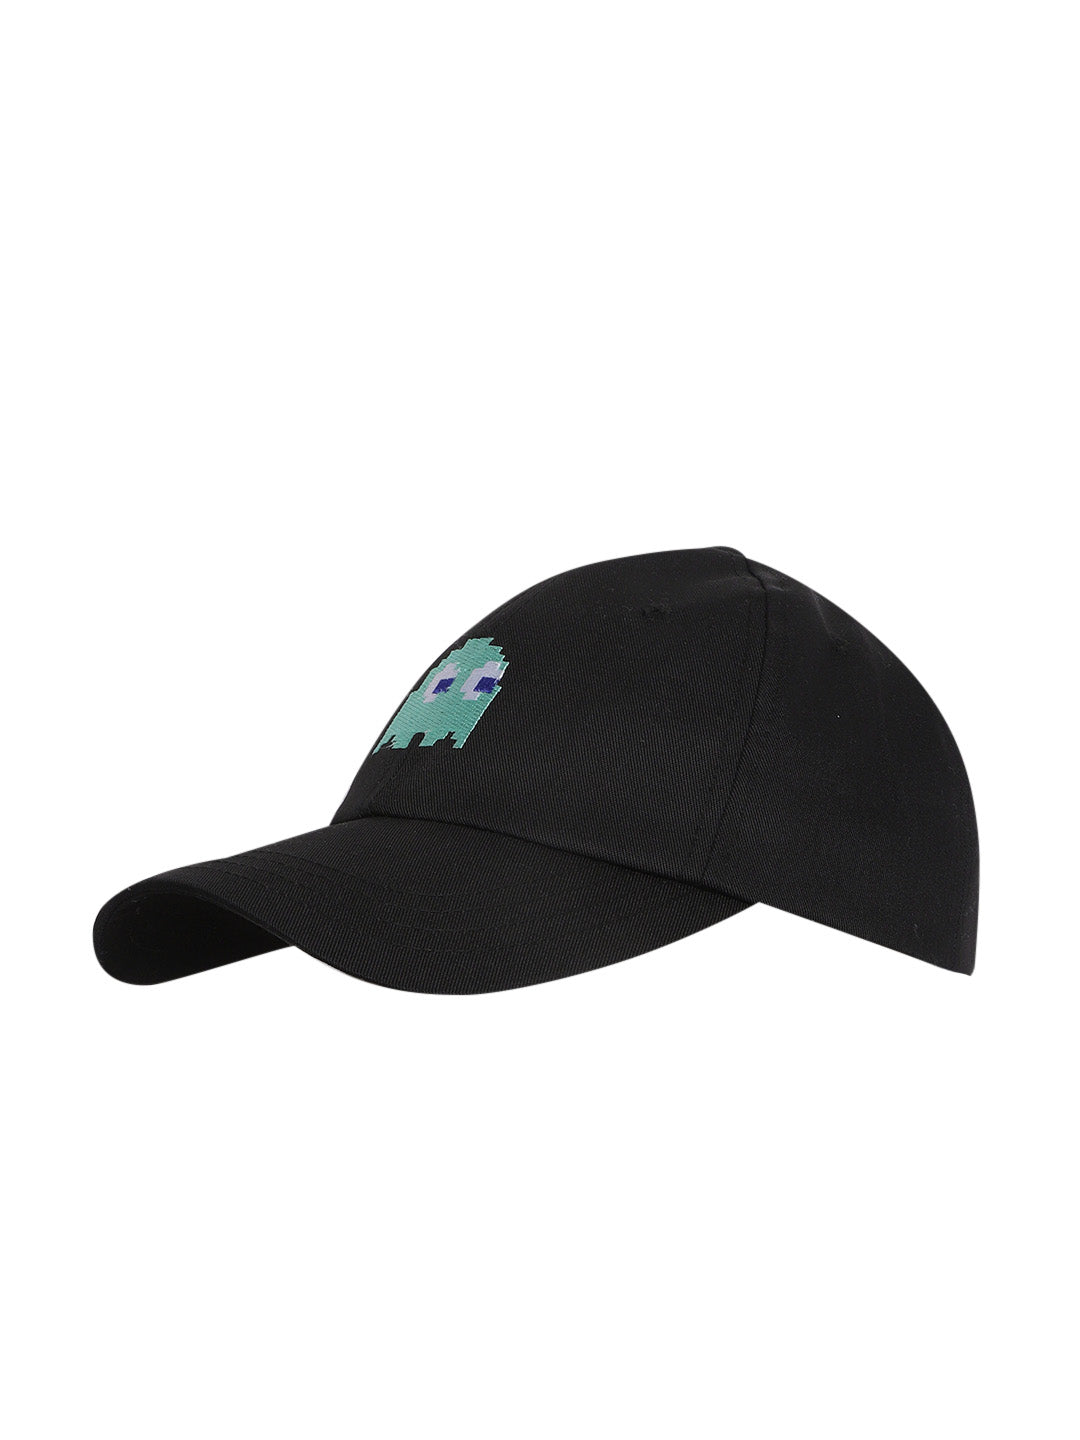 Blueberry Black Pac-Man embroidered baseball cap